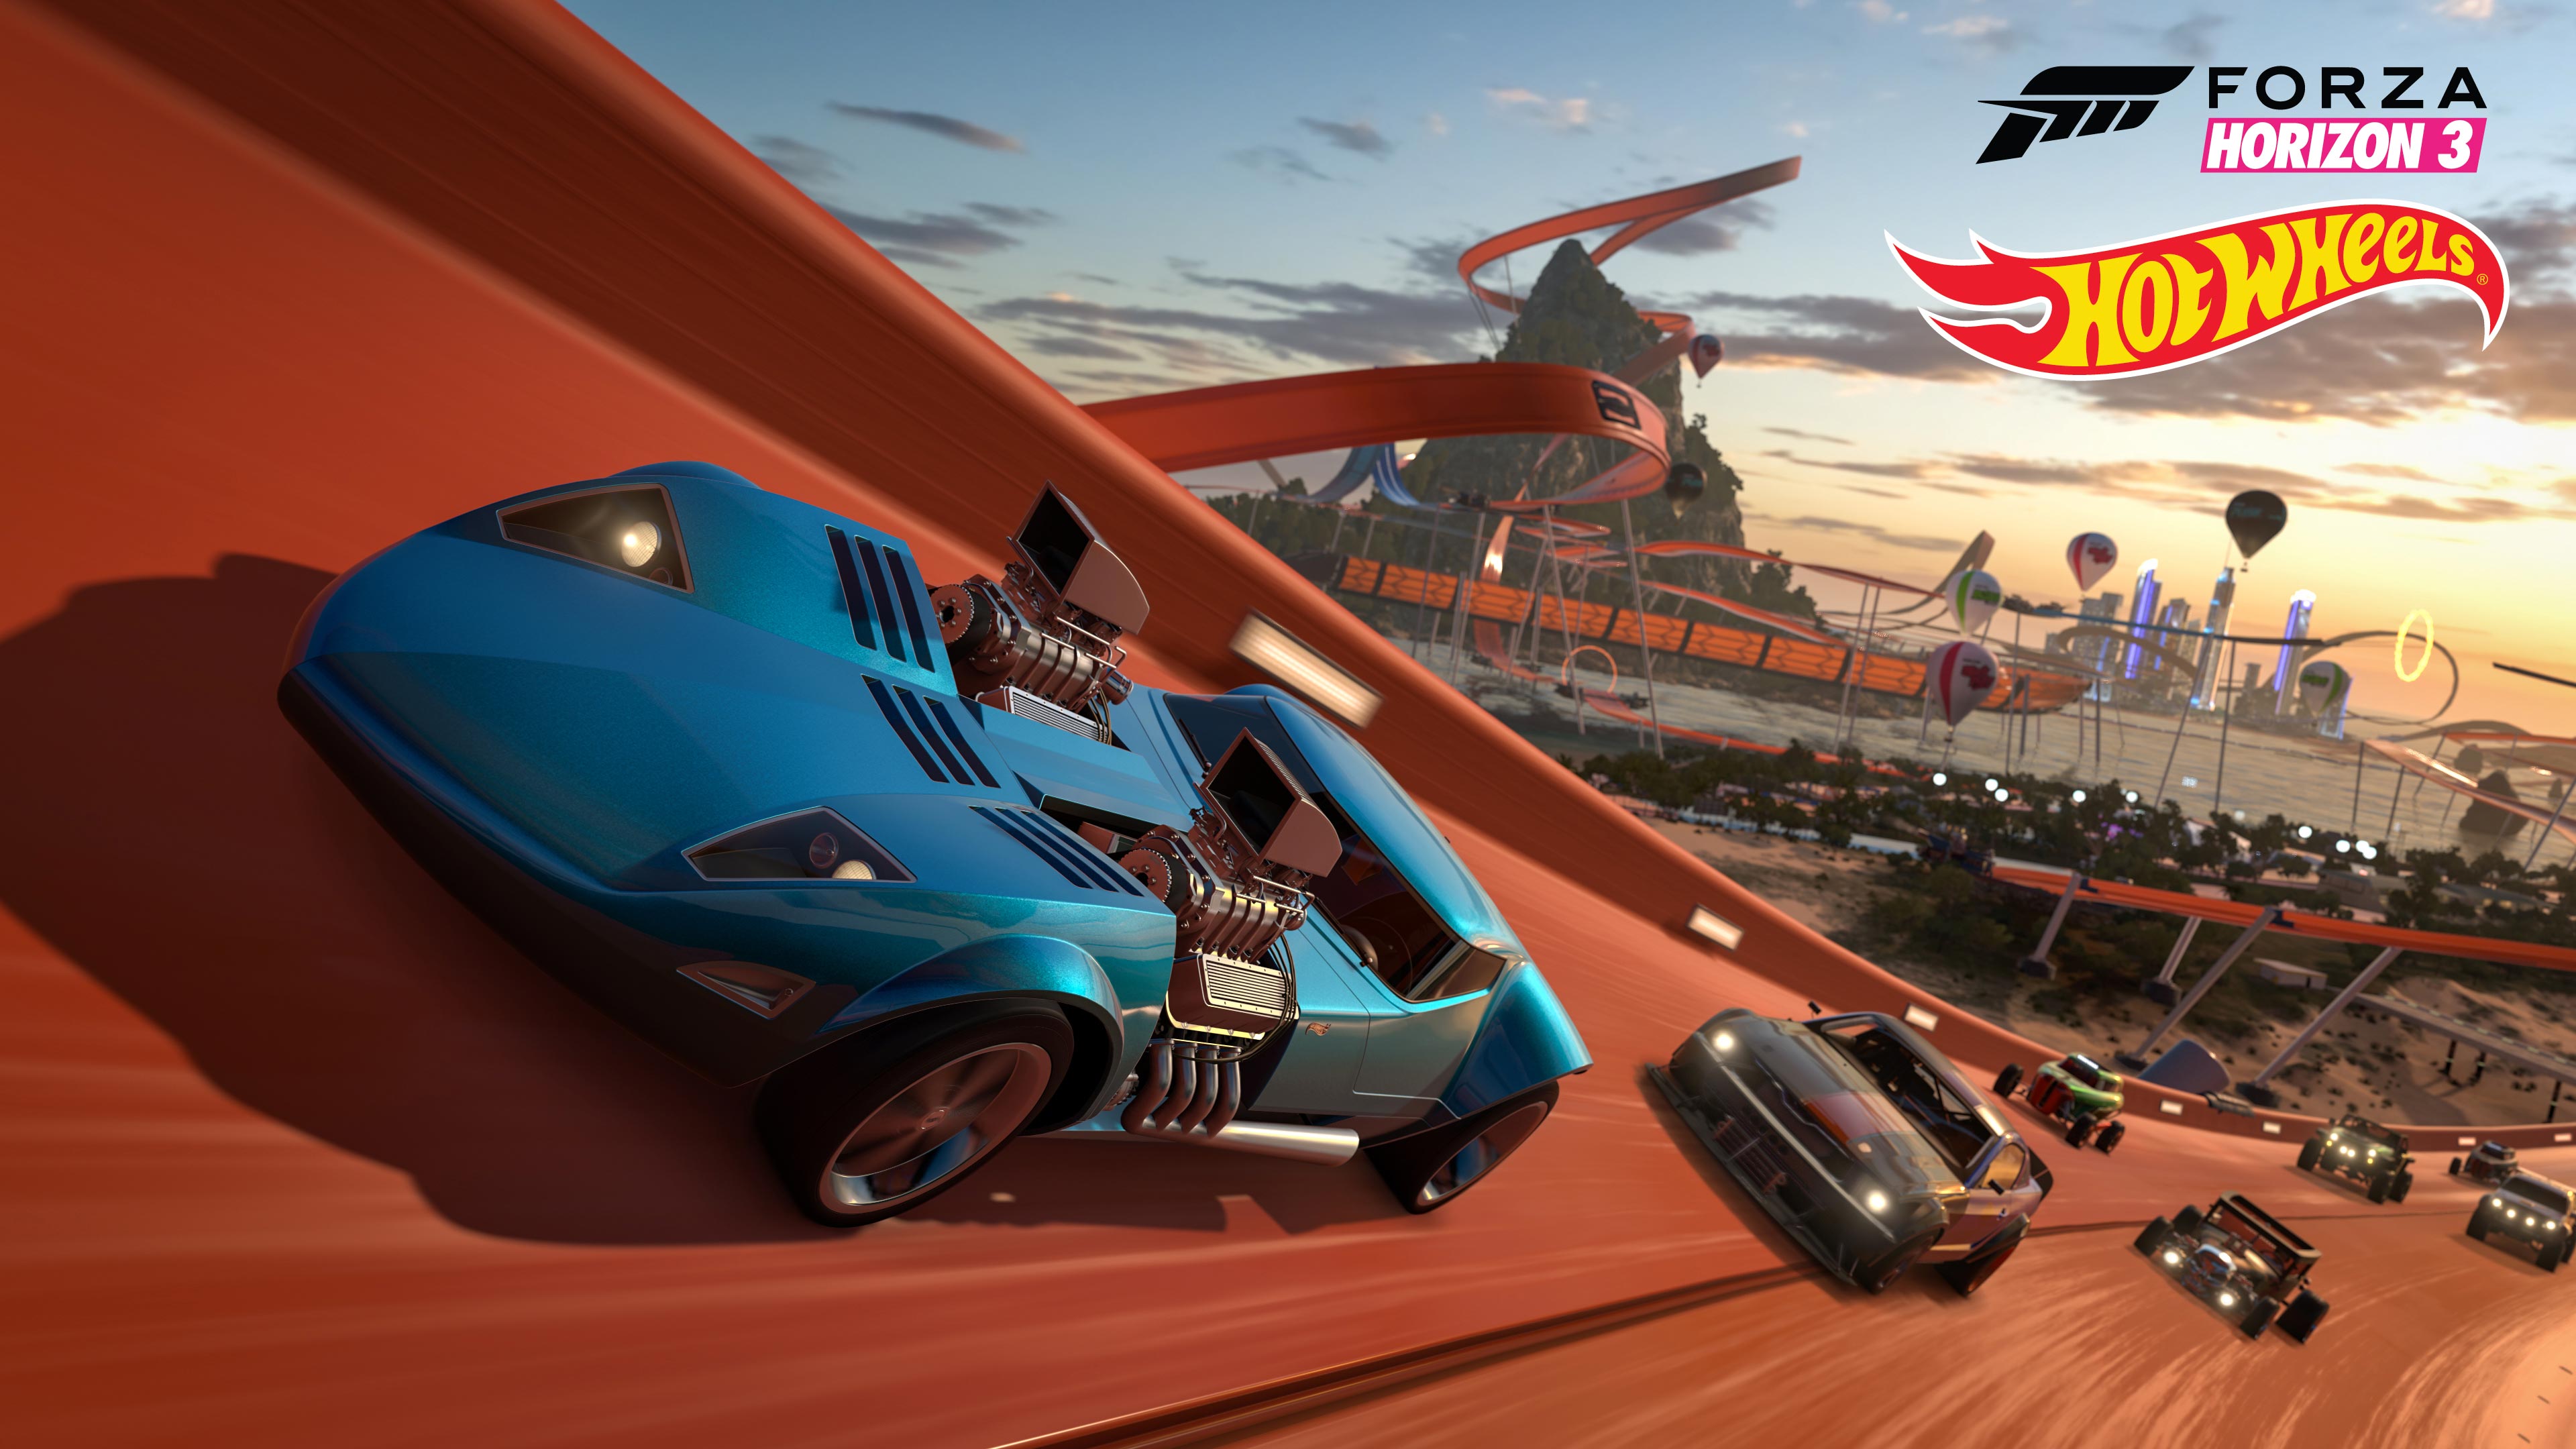 Hot Wheels are coming to Forza Horizon 3 in new expansion